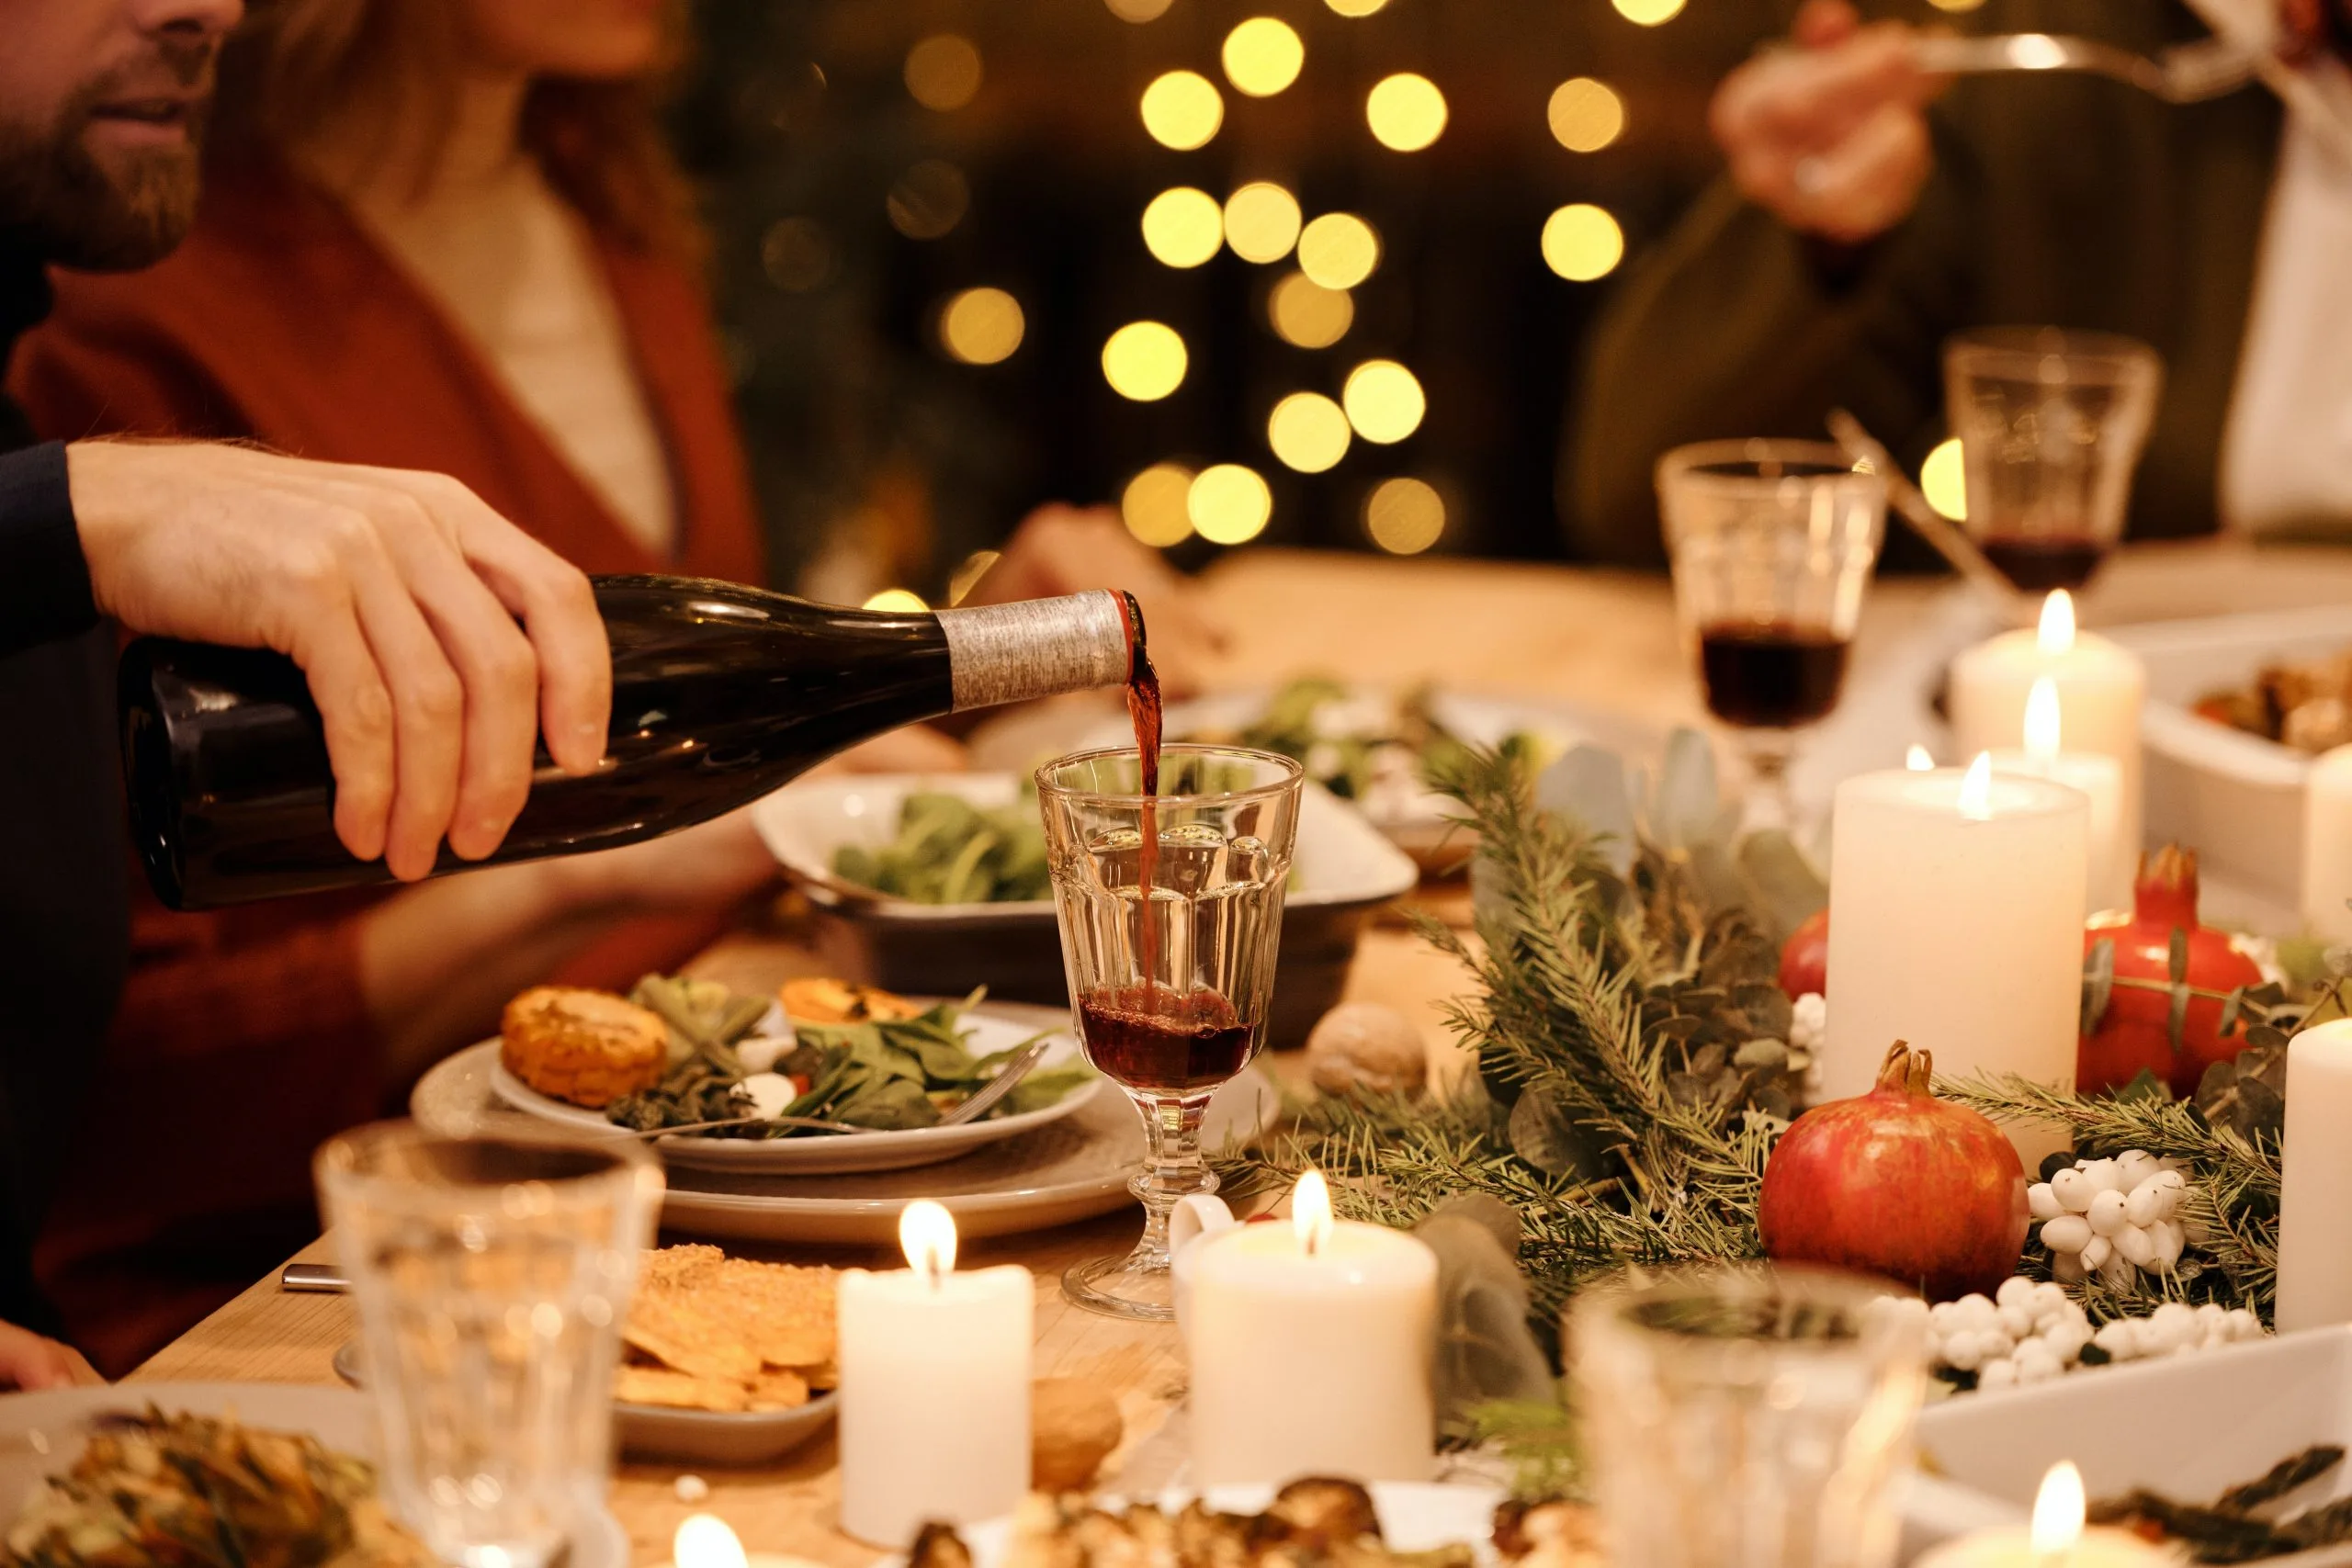 Could red wine be a better choice this festive season?